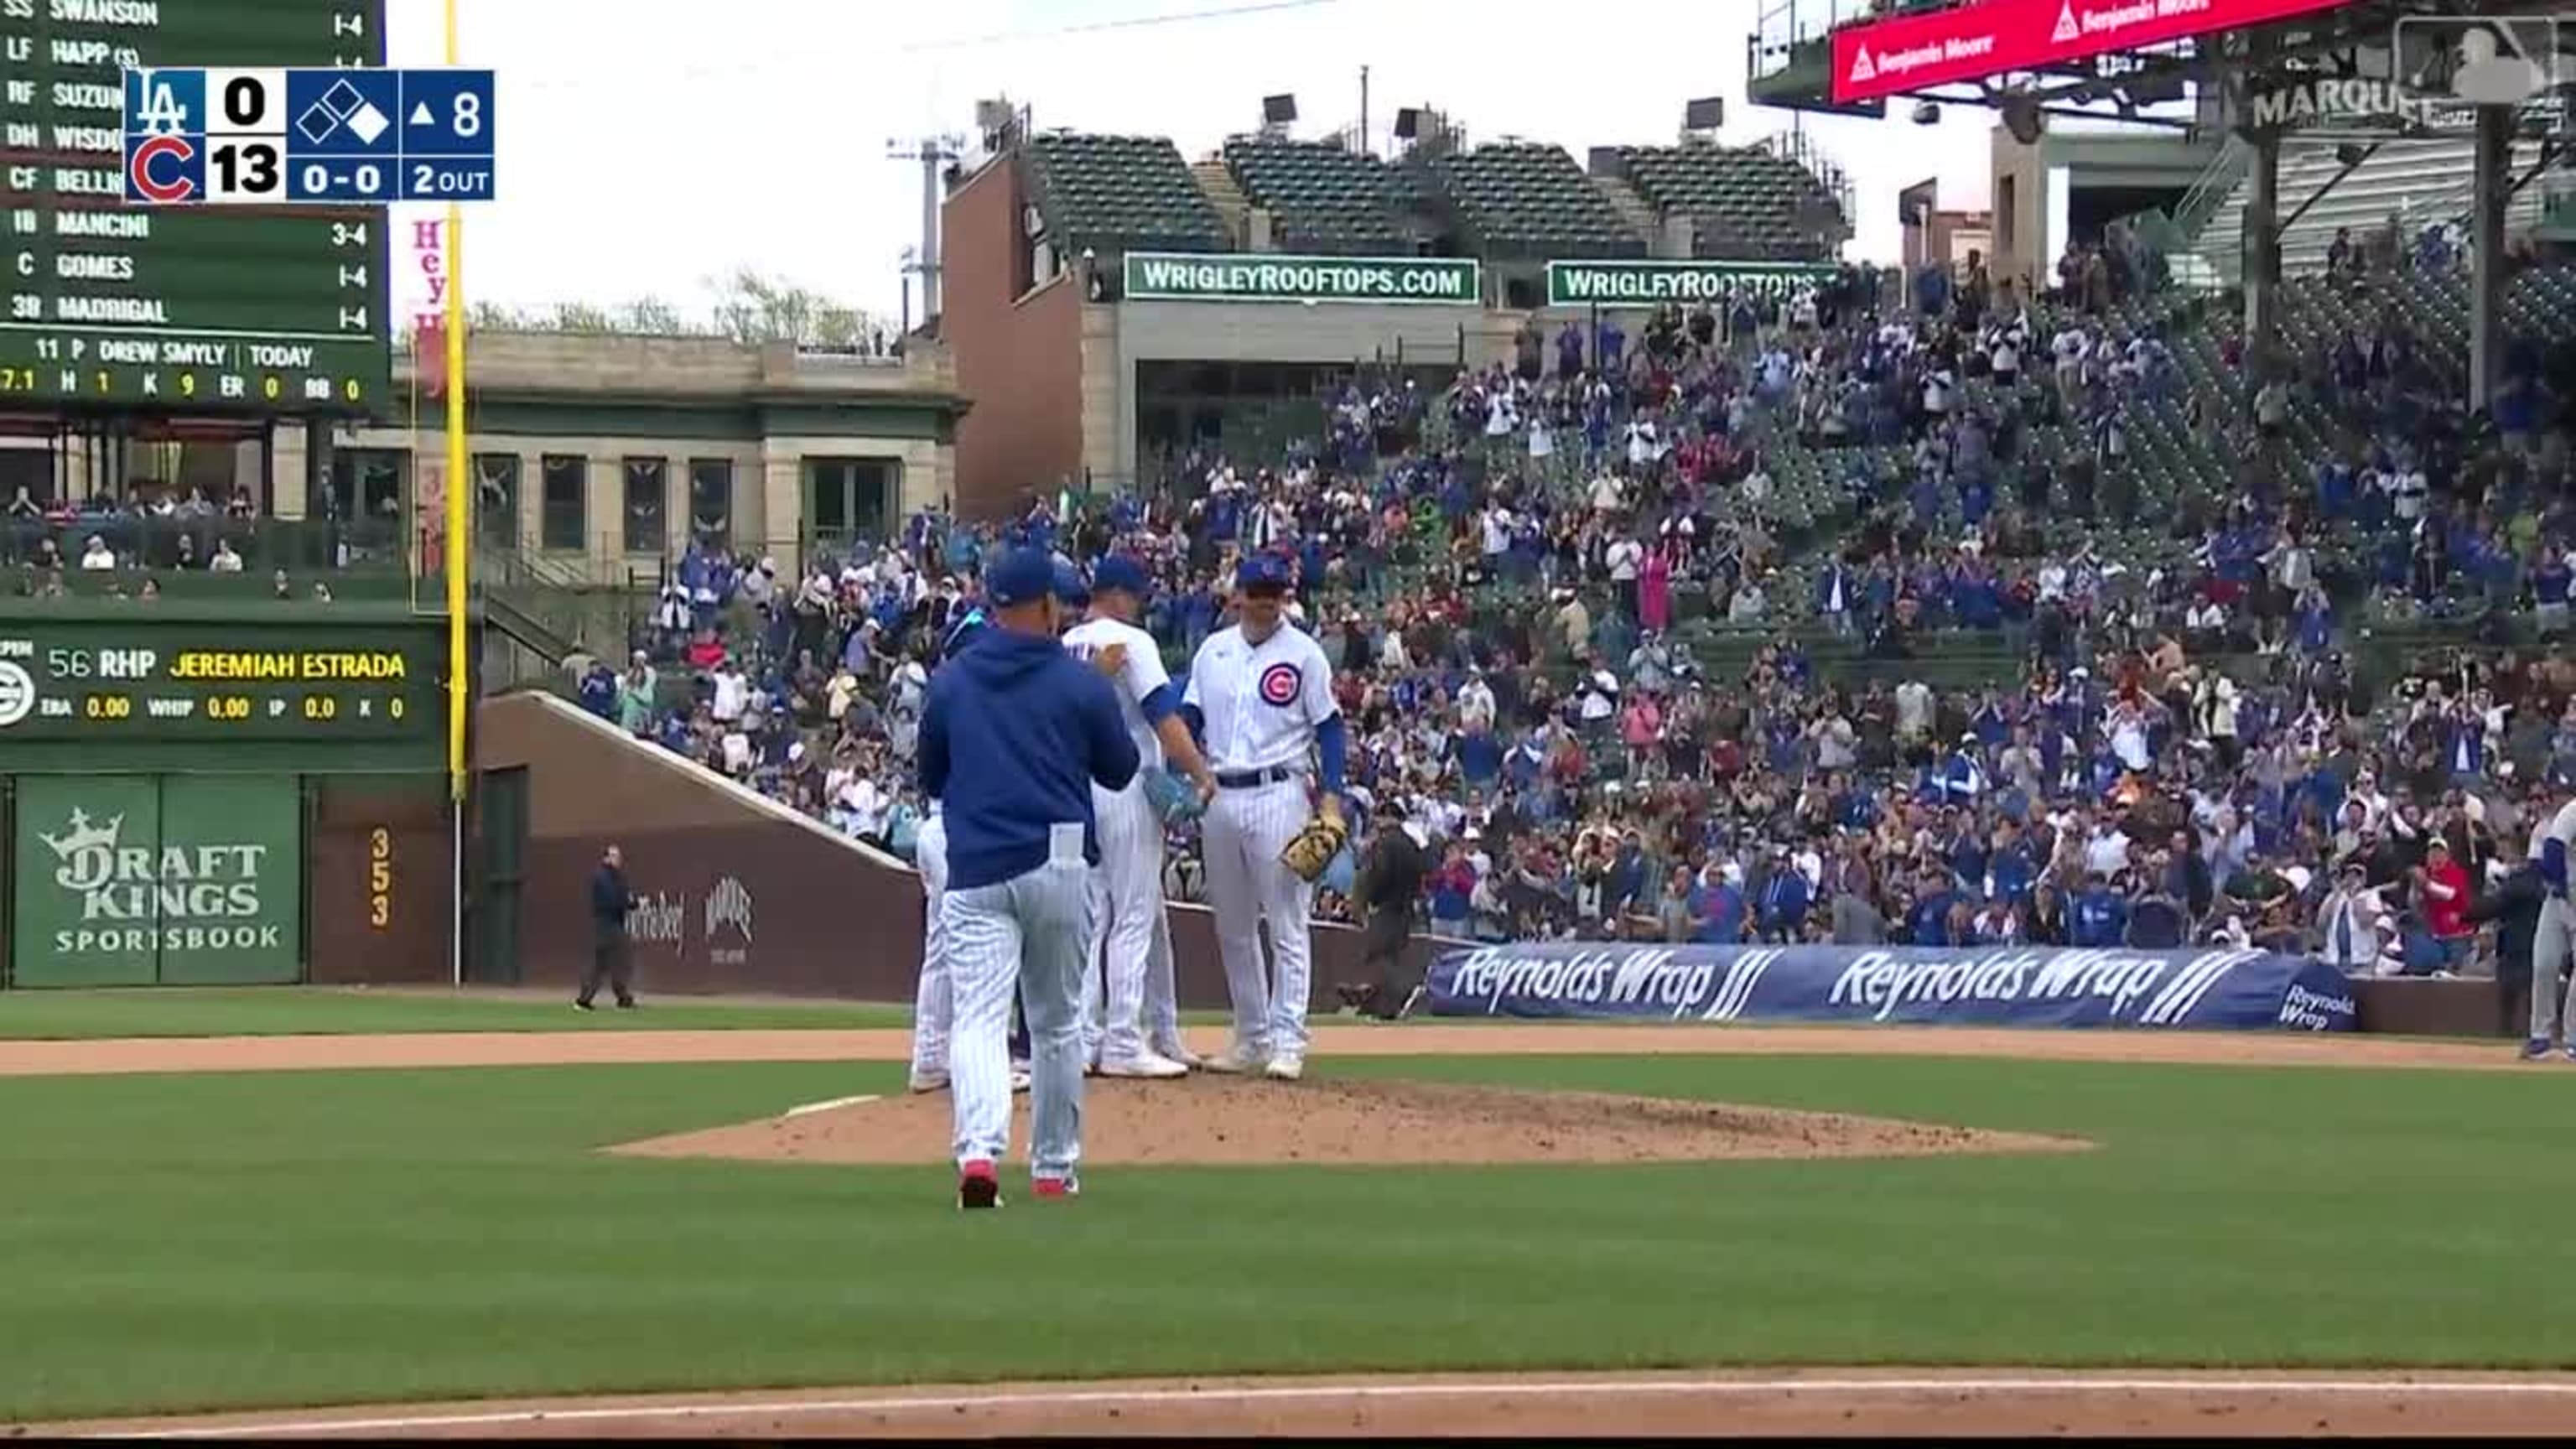 Cubs' Drew Smyly loses perfect game bid to infield dribbler after collision  with catcher